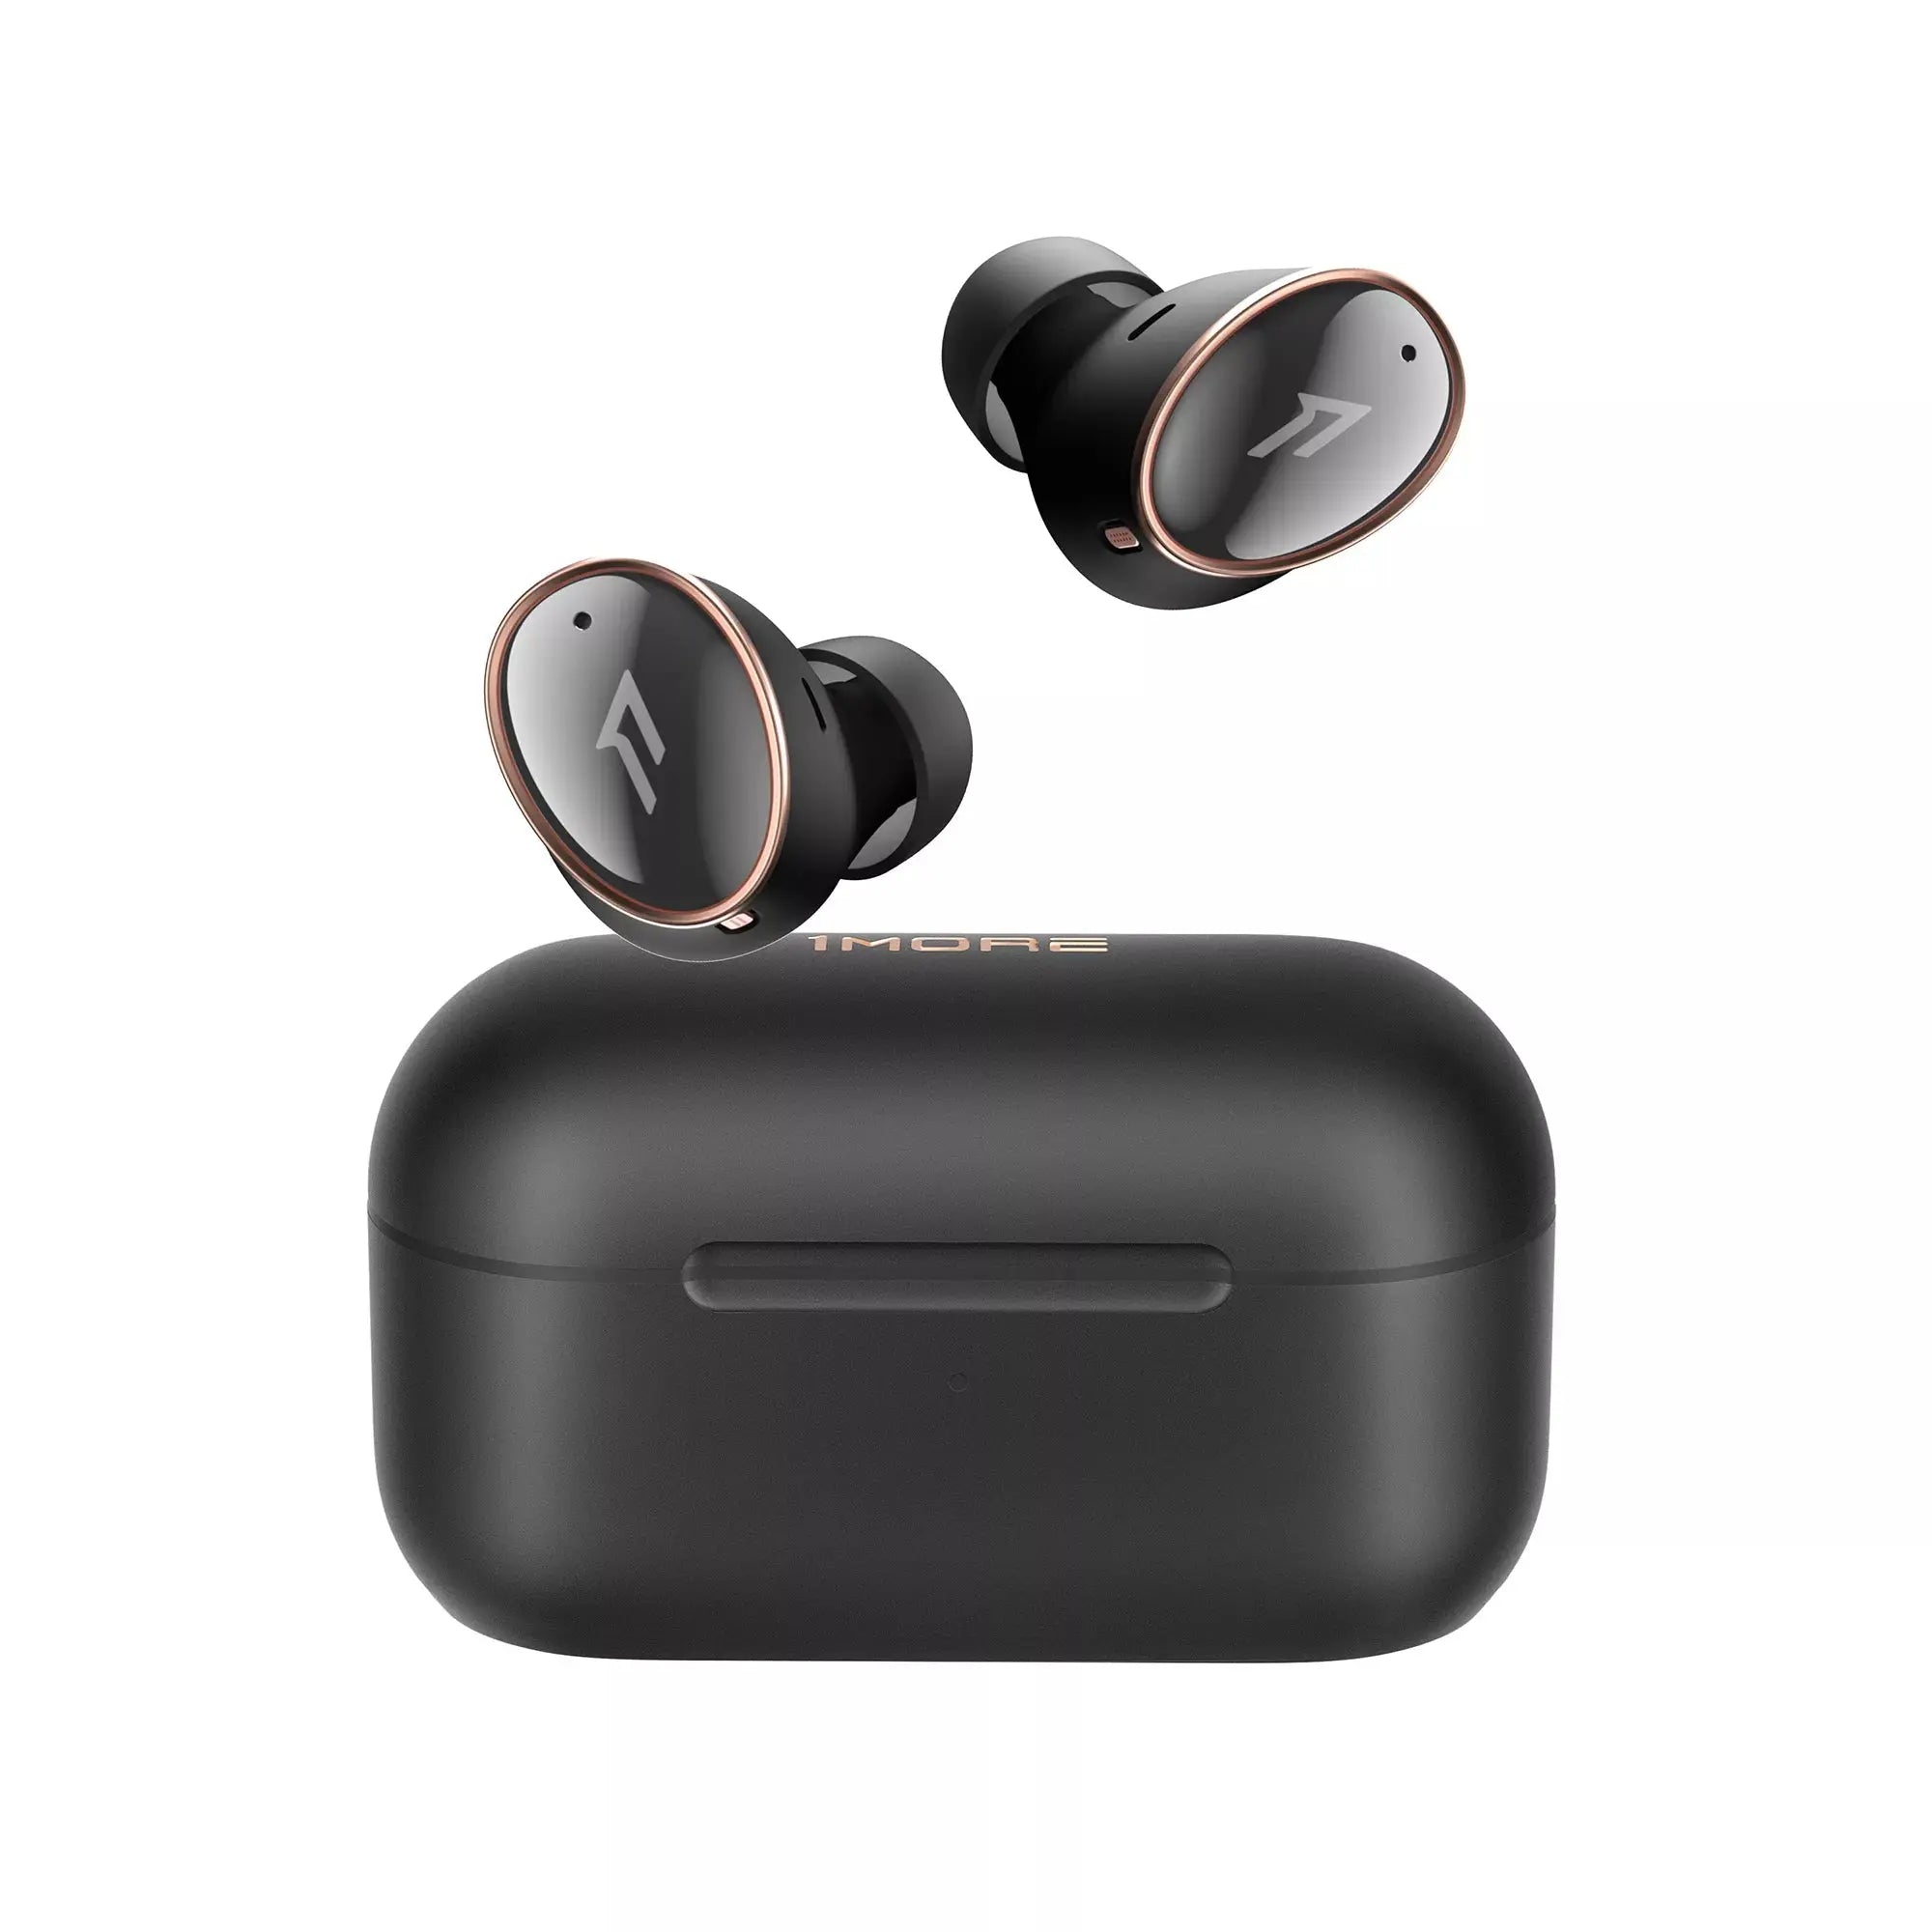 12 Exciting True Wireless Earbuds Trends 2019